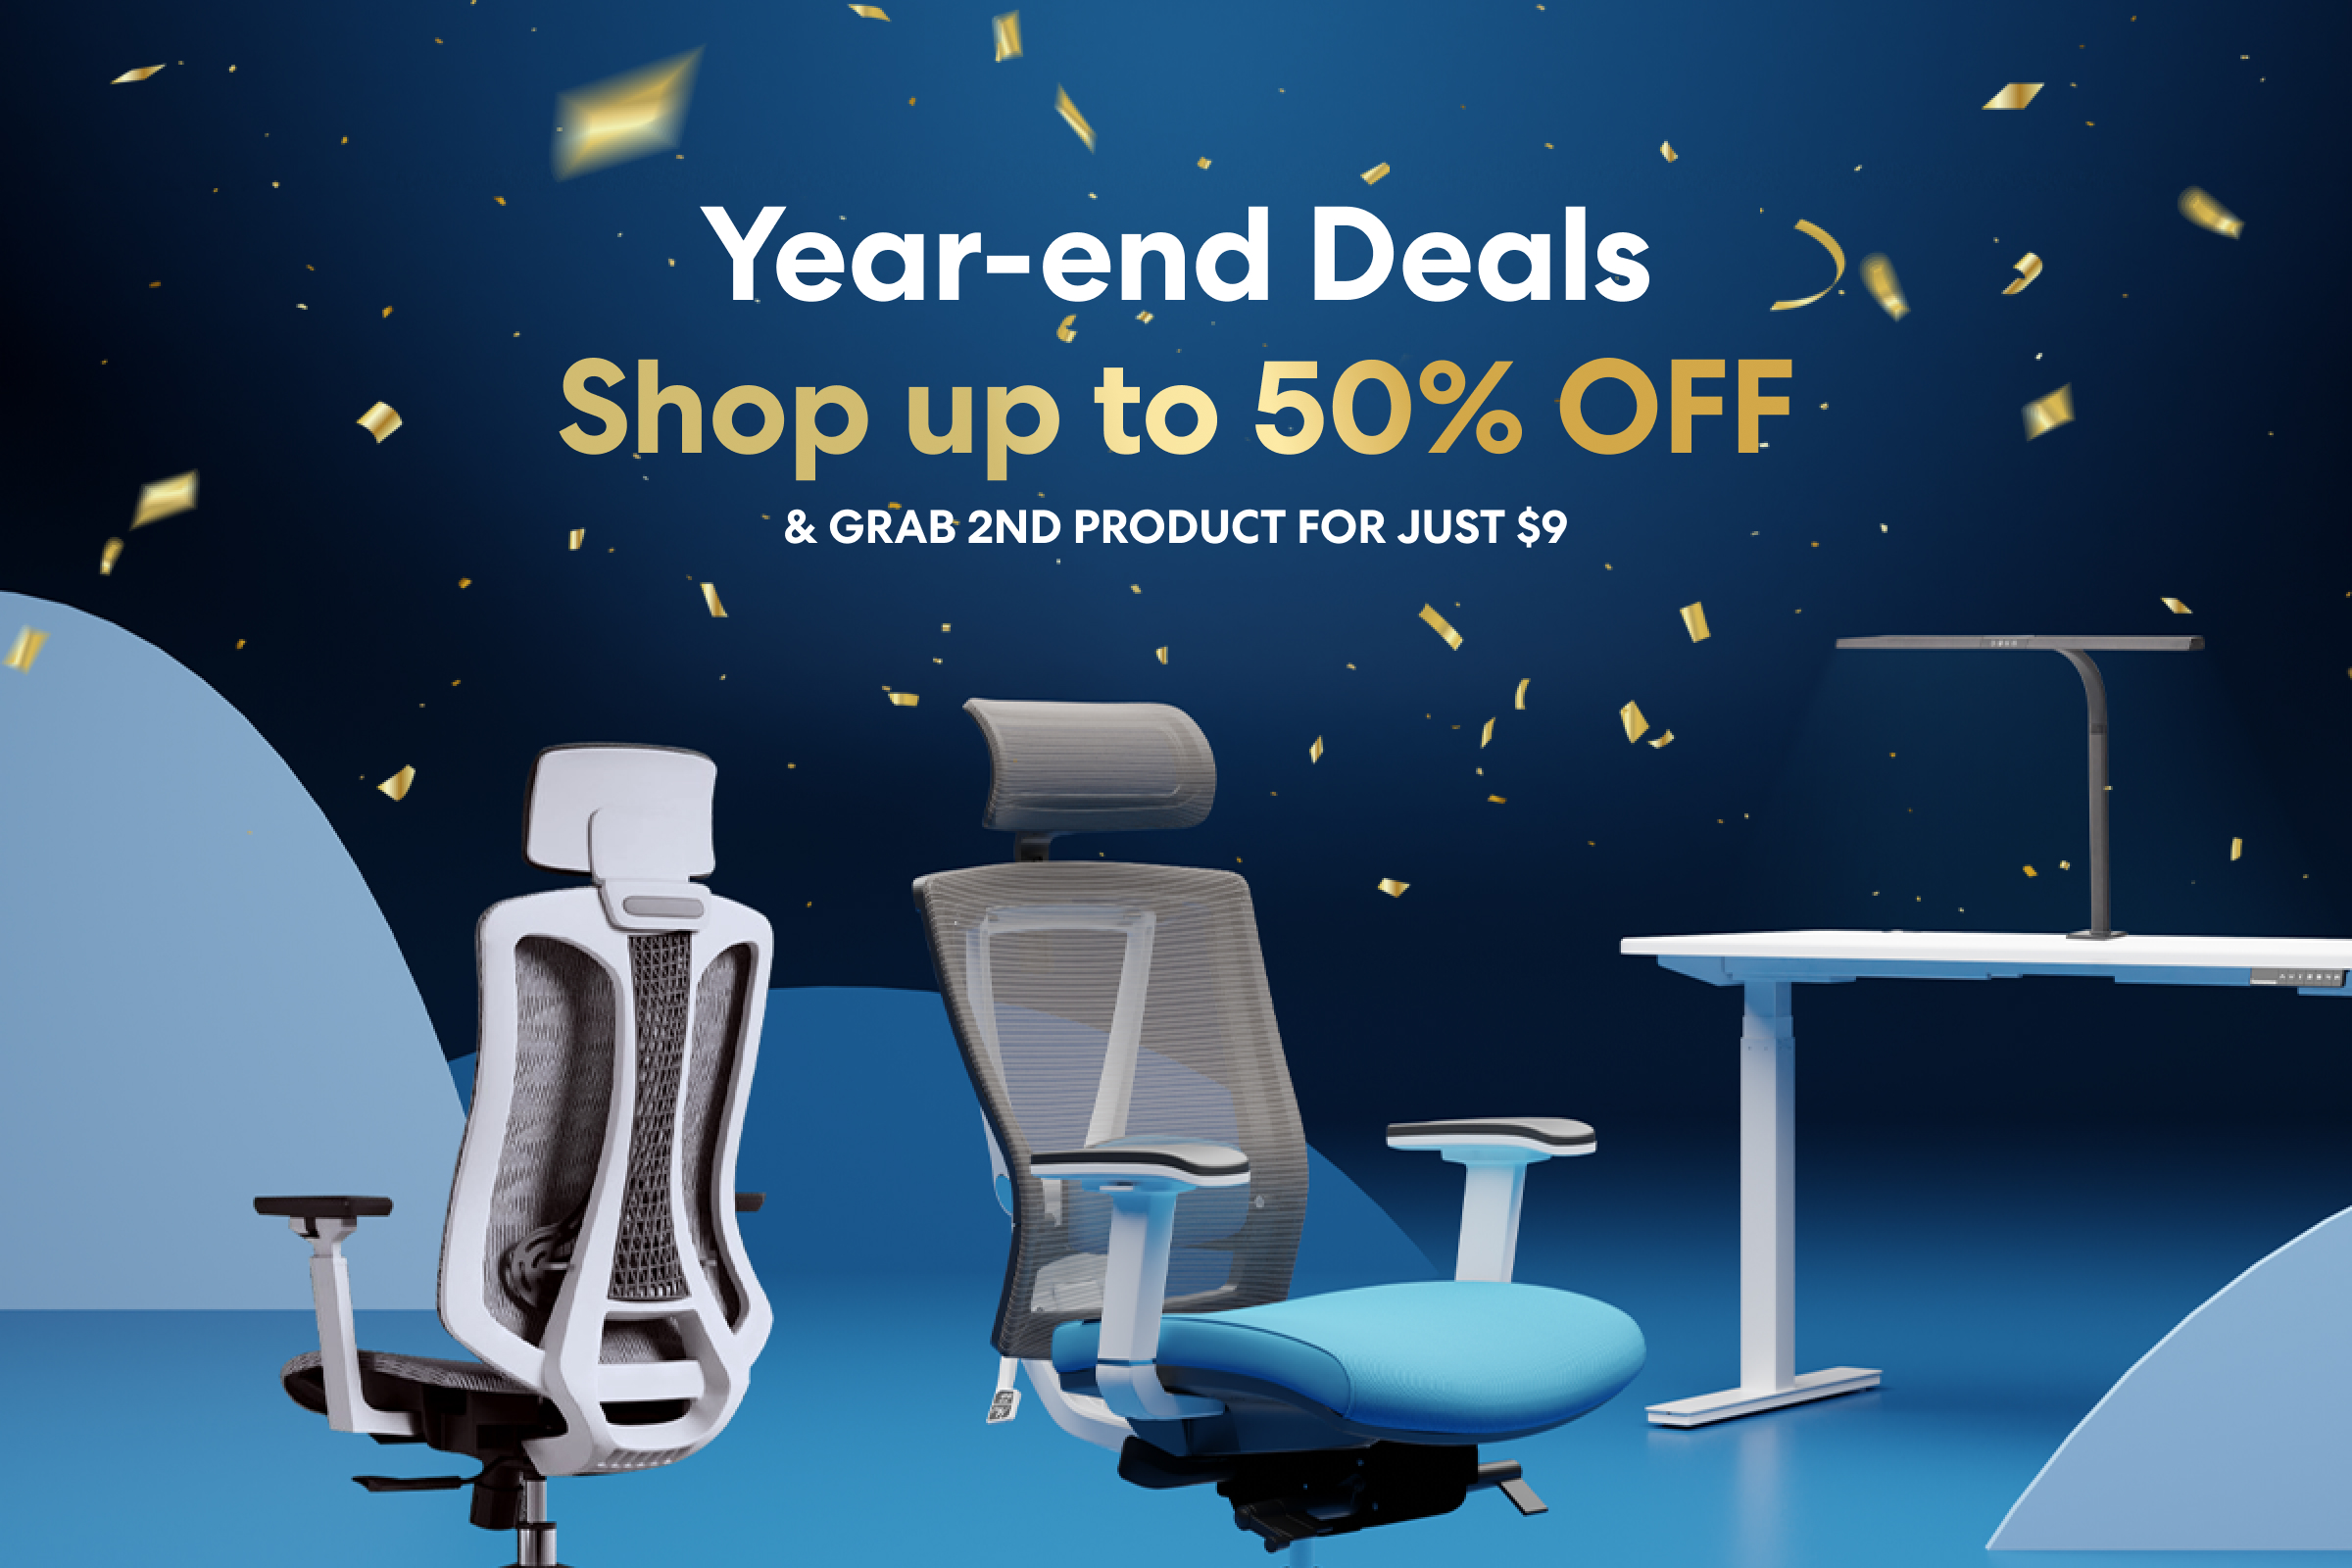 Year End Deals Are Here! Get up to 70% OFF! - Terms & Conditions